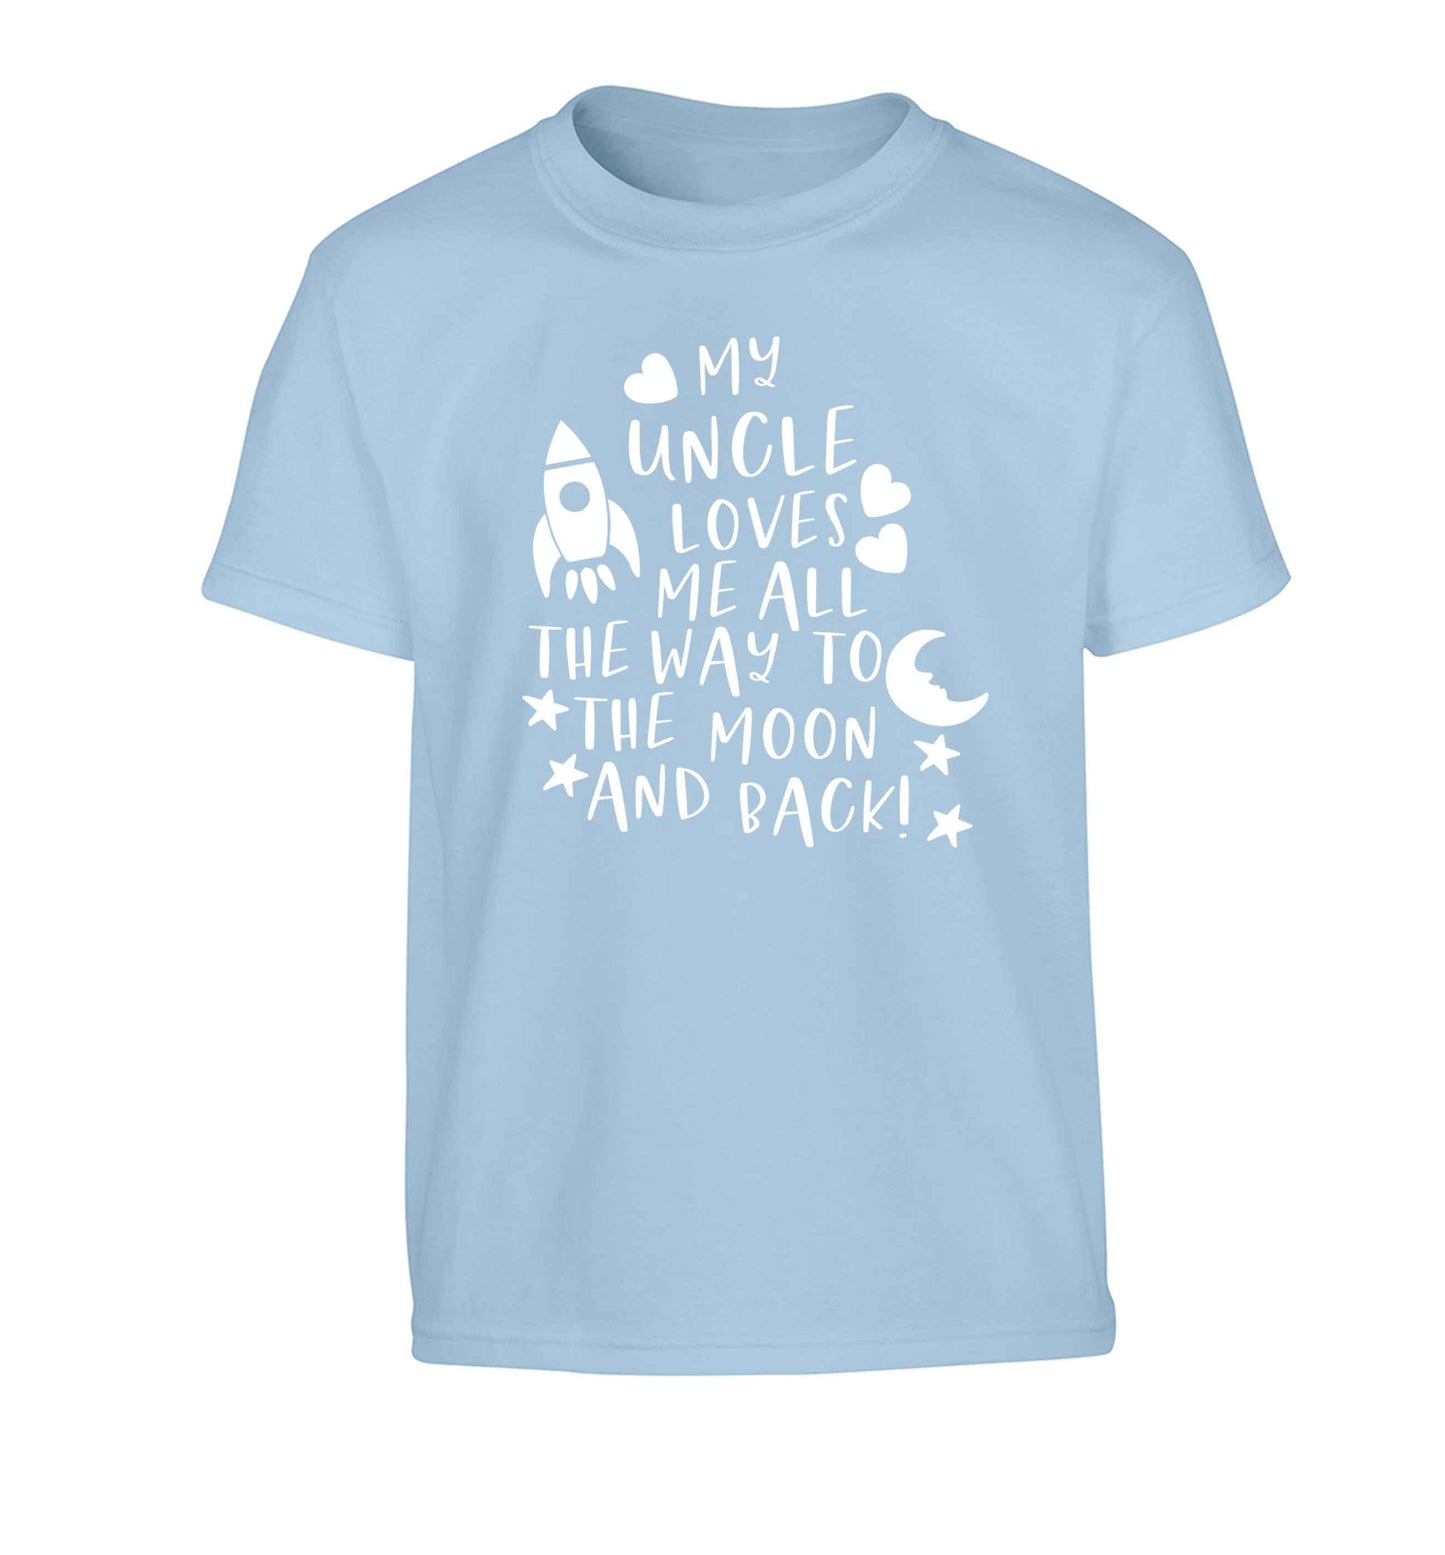 My uncle loves me all the way to the moon and back Children's light blue Tshirt 12-13 Years